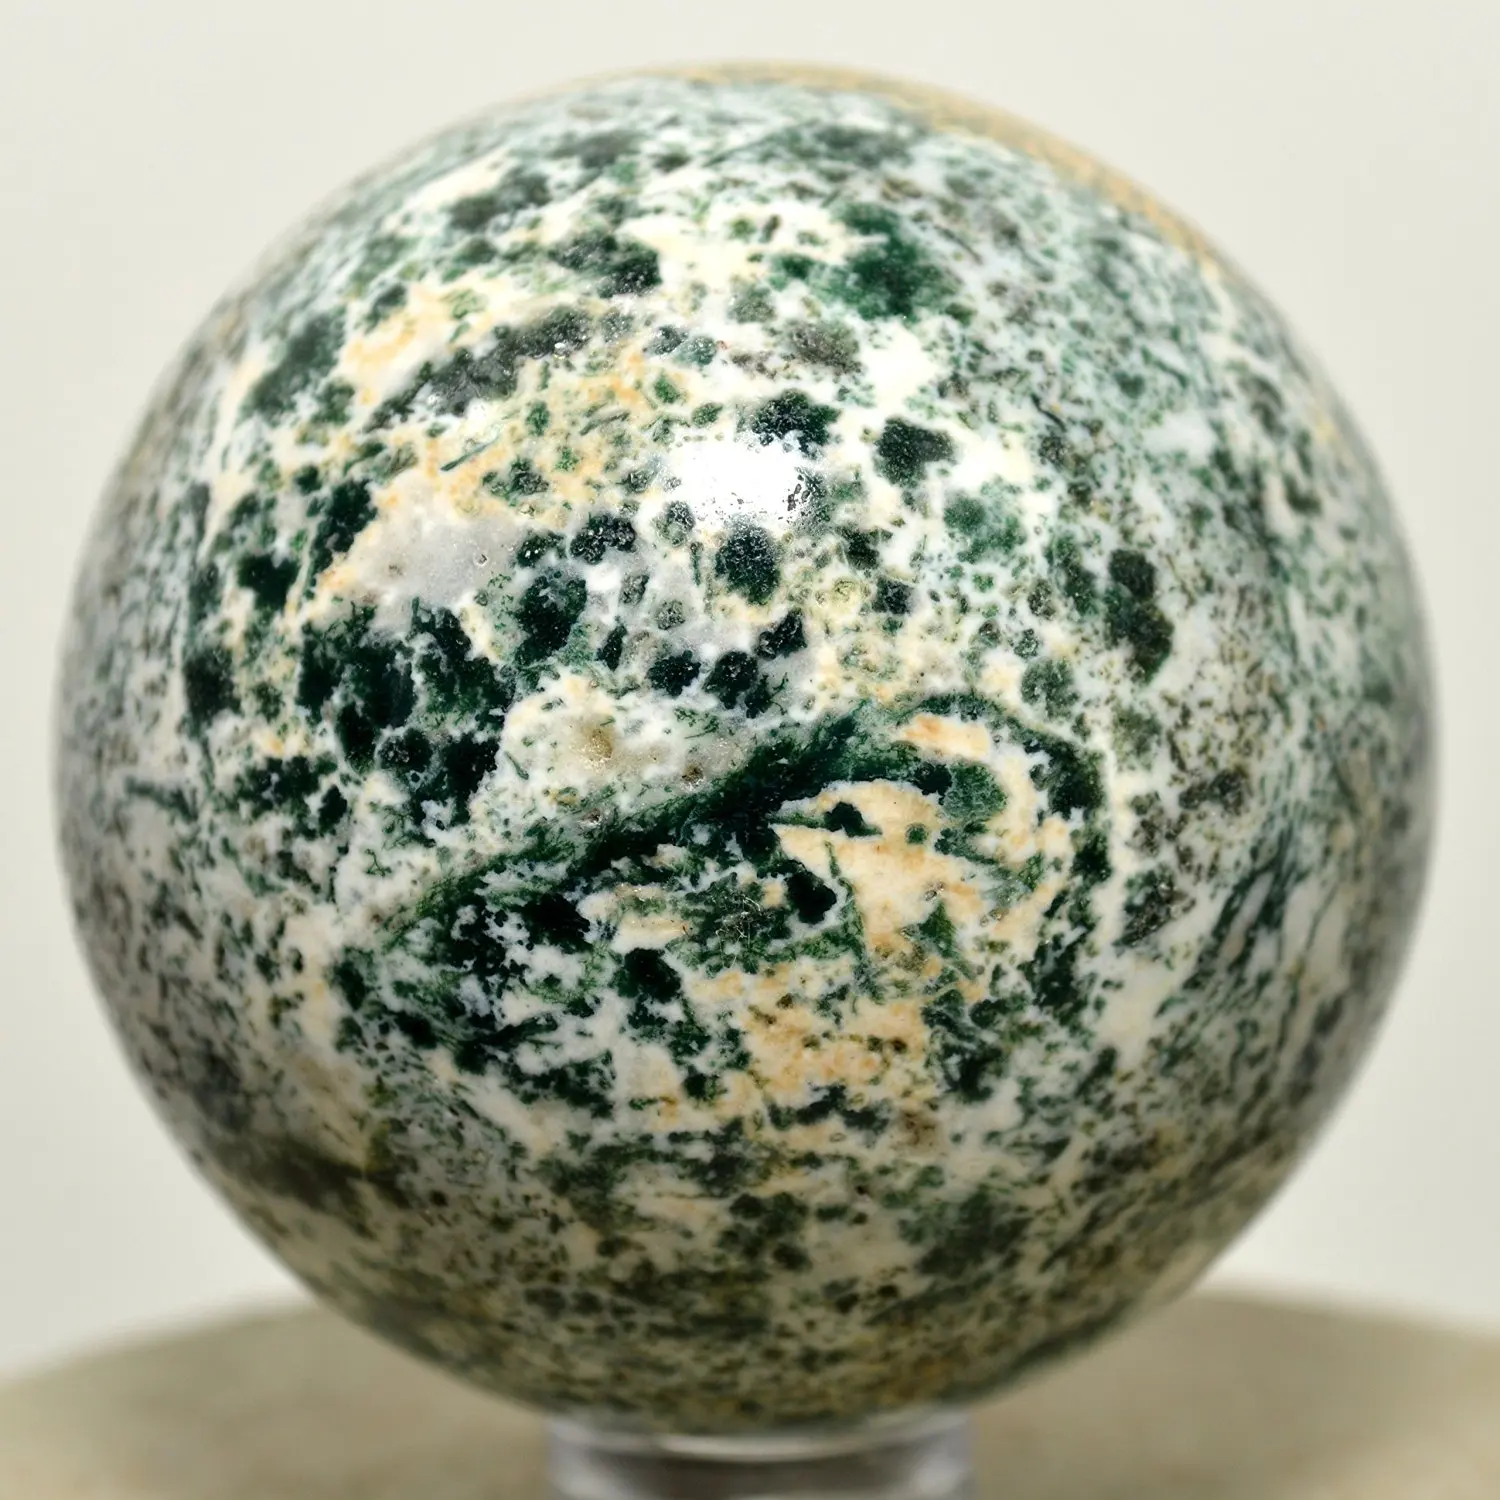 Buy 2" Green Moss Agate Sphere White Natural Crystal Polished Decor